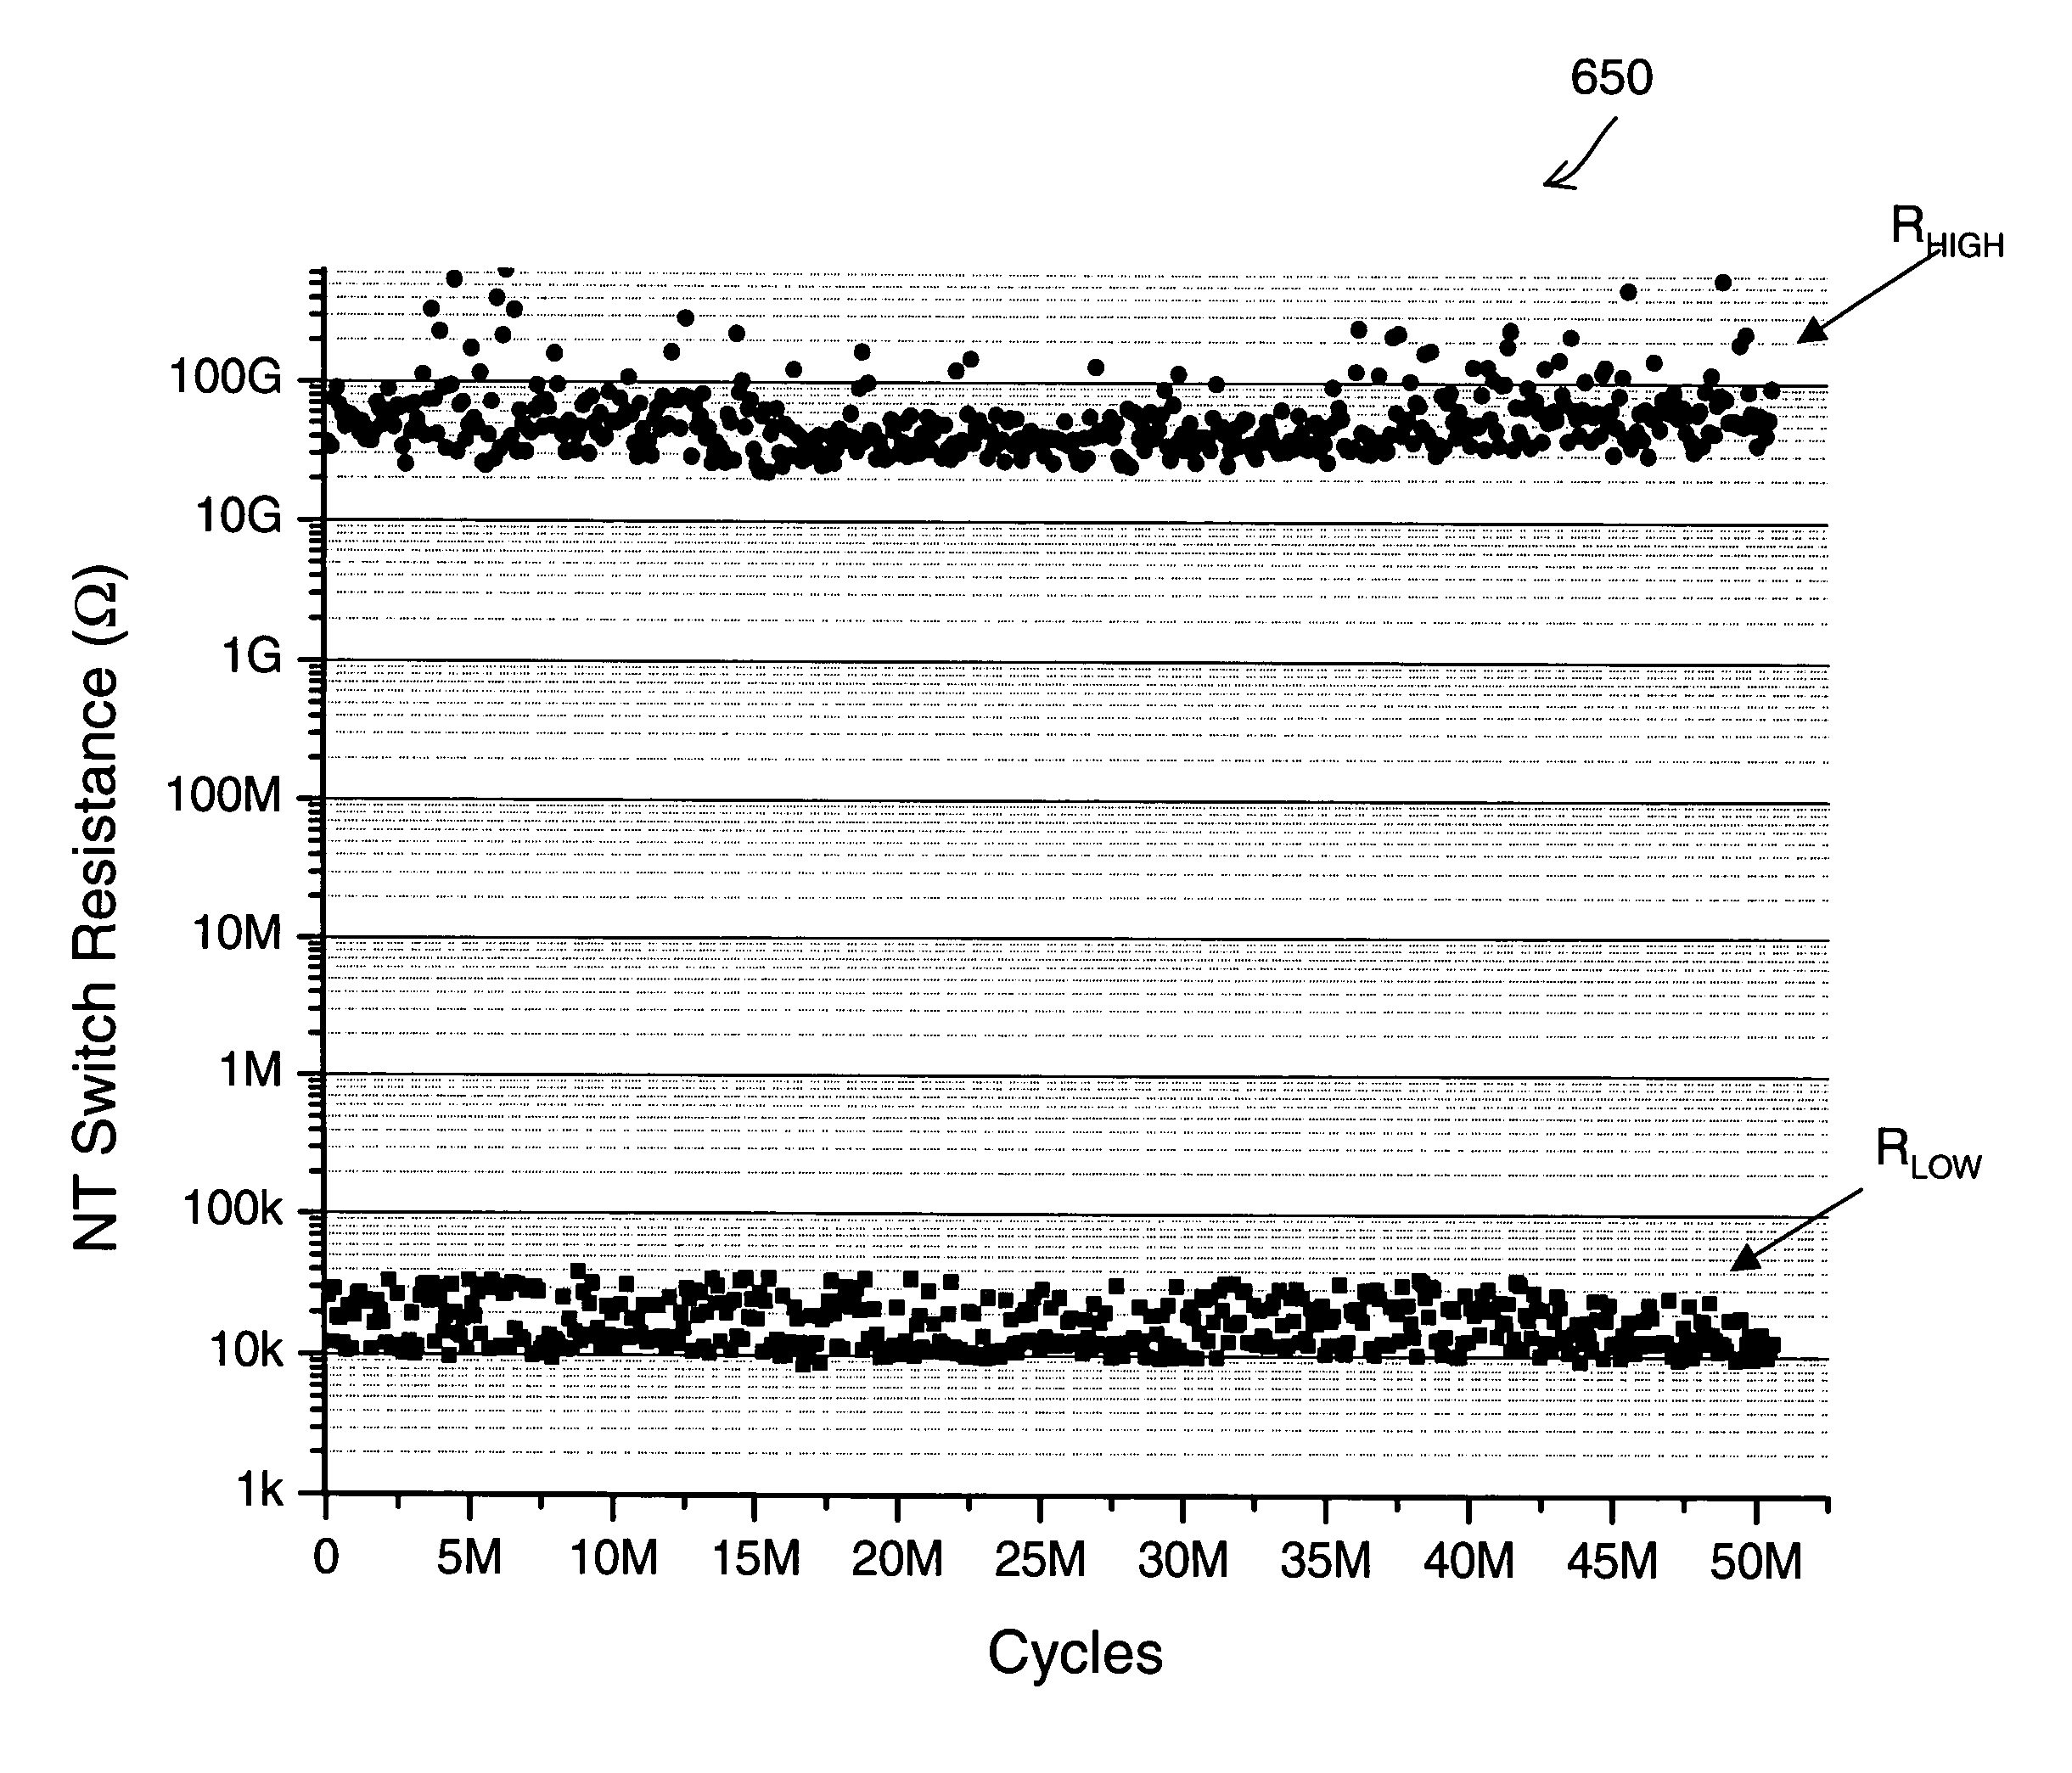 Two-terminal nanotube devices and systems and methods of making same